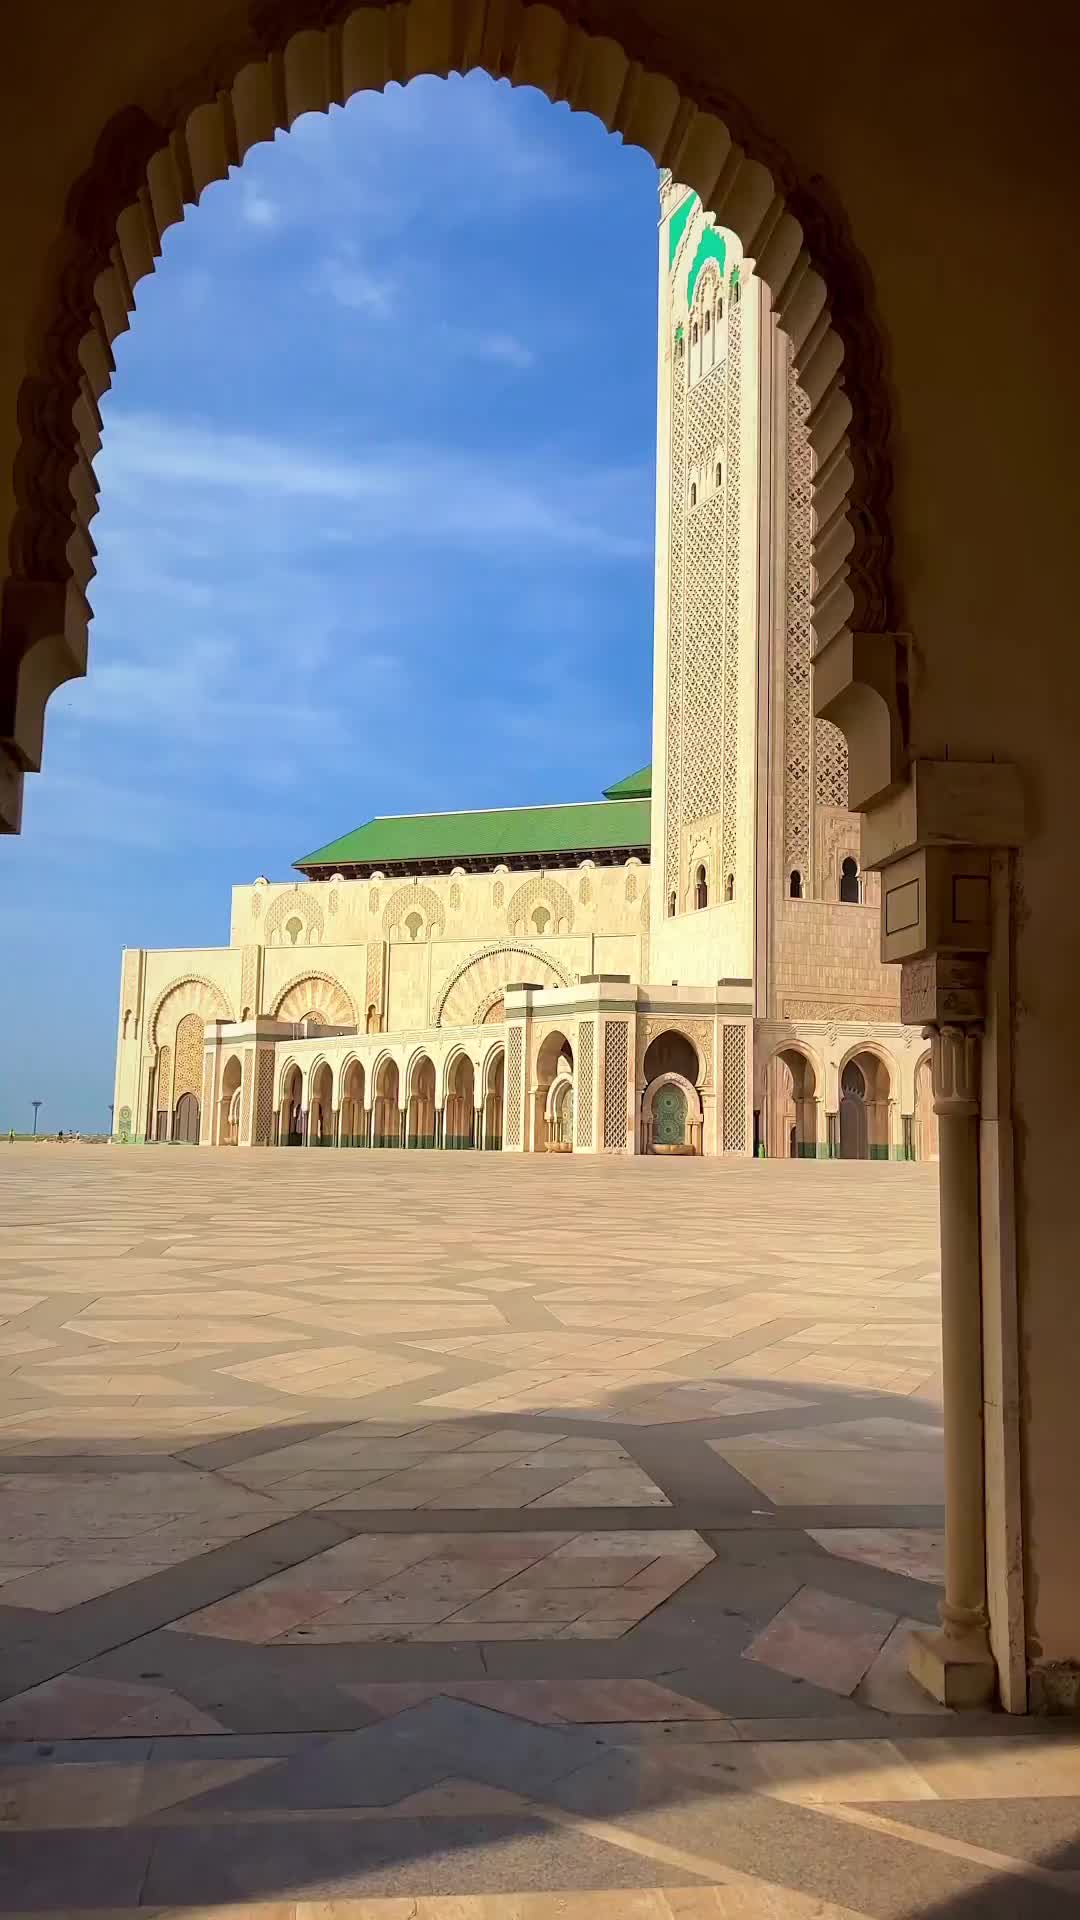 Discover Hassan II Mosque: 7th Largest Mosque & 2nd Tallest Minaret